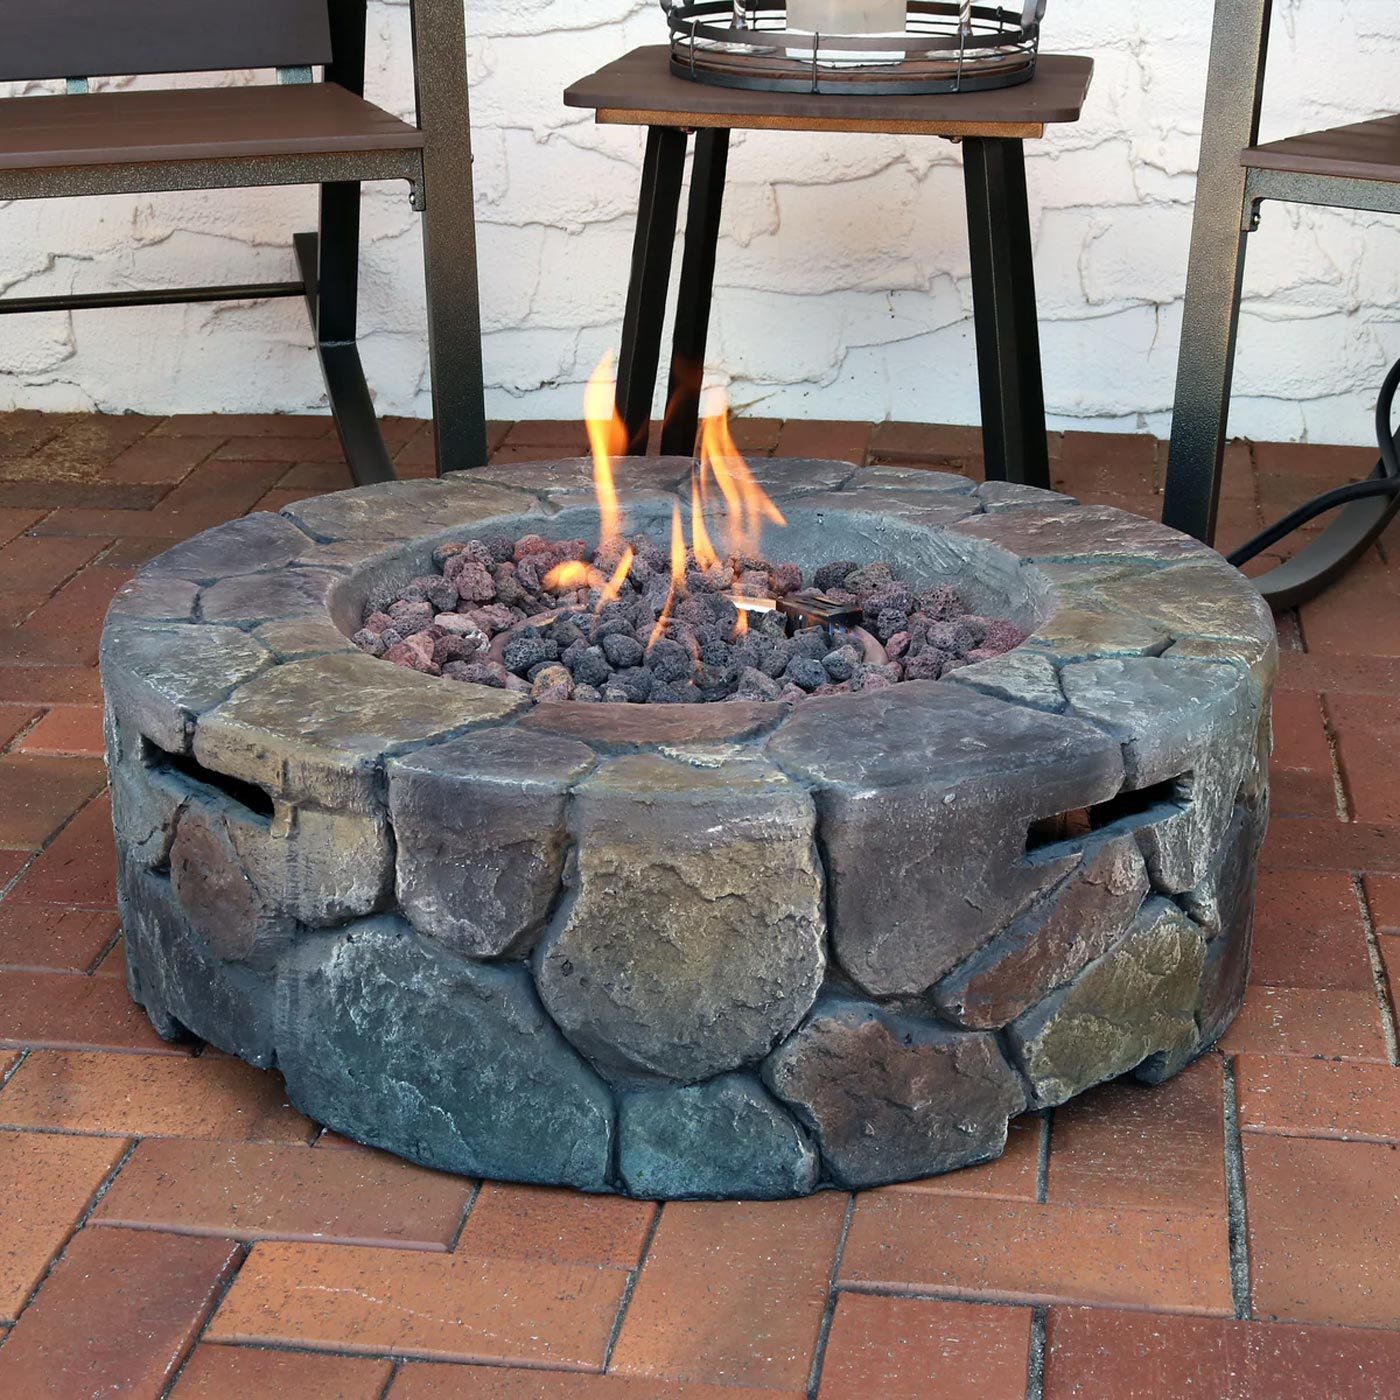 Best Metal, Bricks & Electric Backyard Fire Pit Ideas for a Stylish Outdoor Space